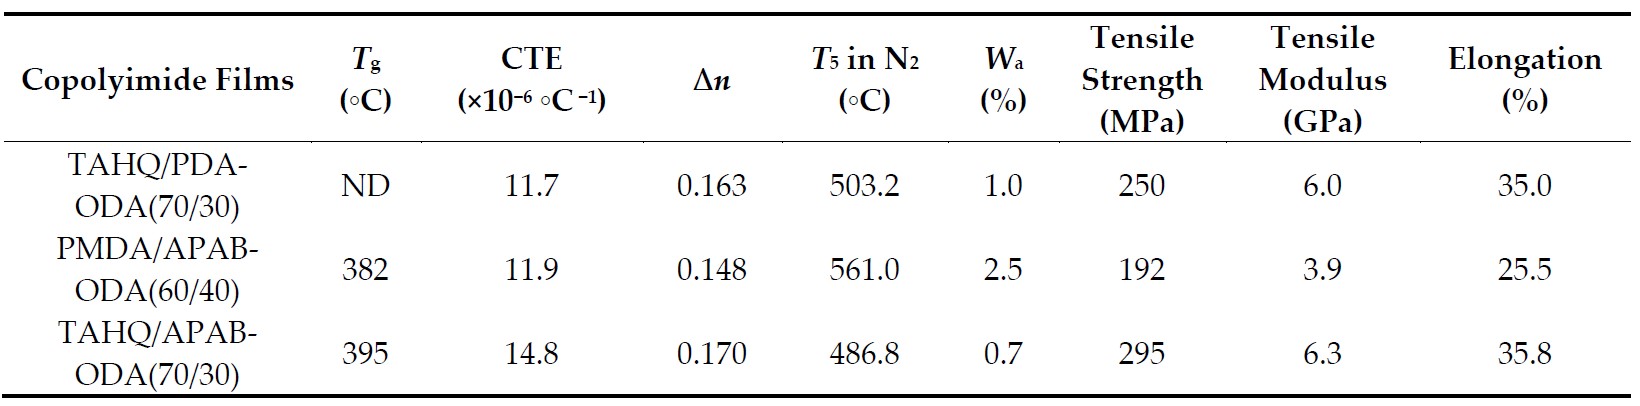 Table 3. Properties of Copolyimide Films [40].